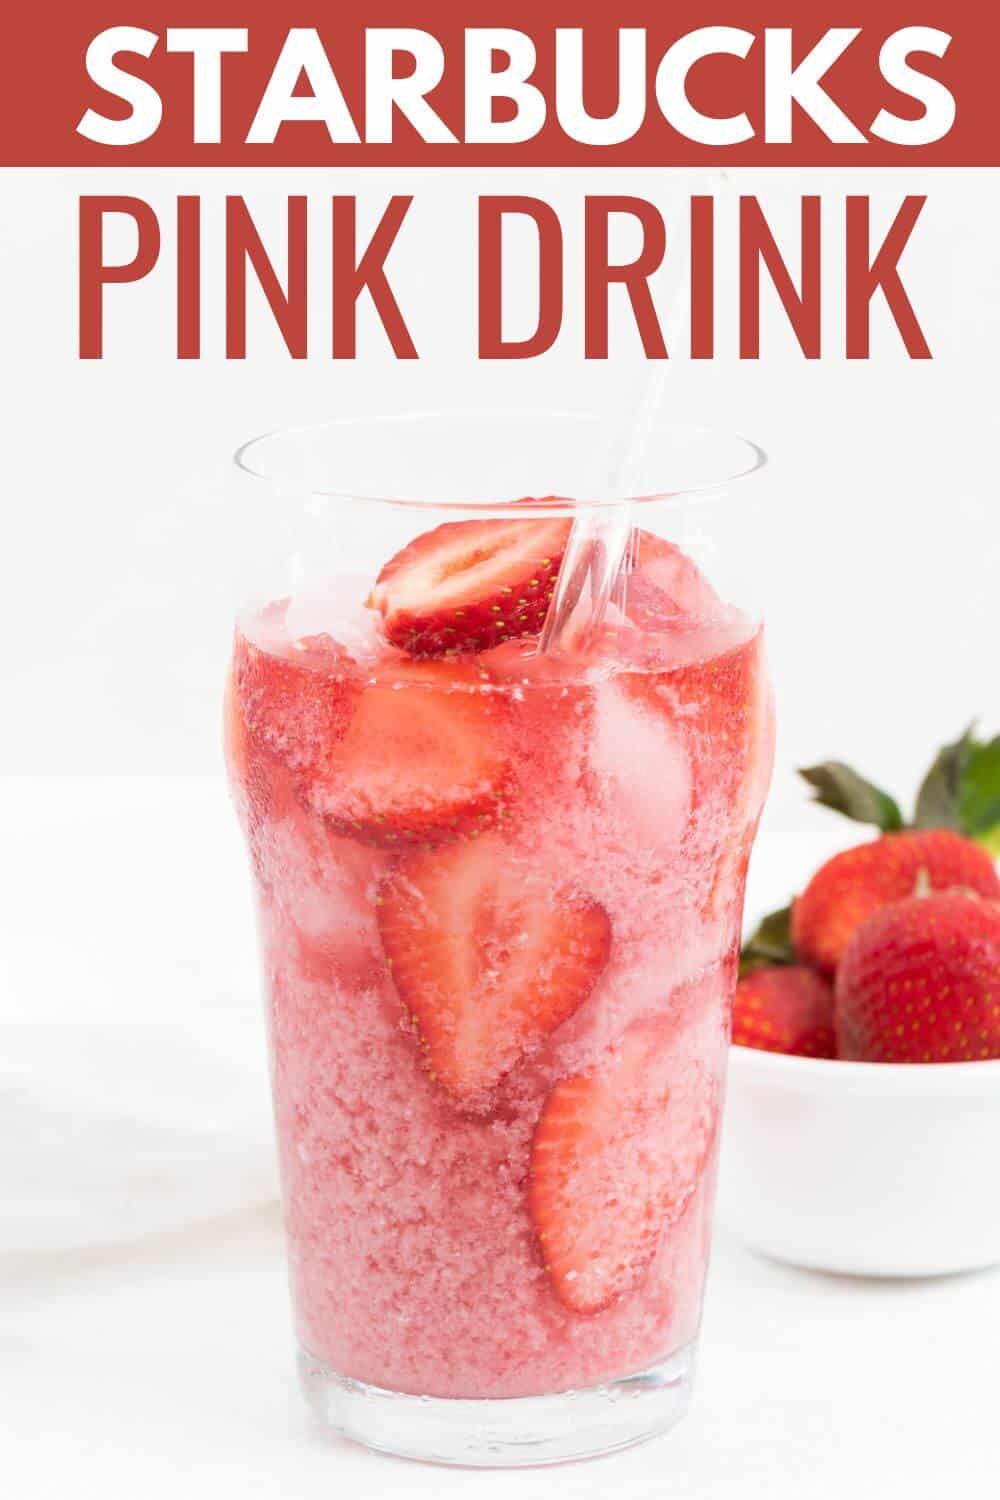 Pink drink with recipe title text overlay.